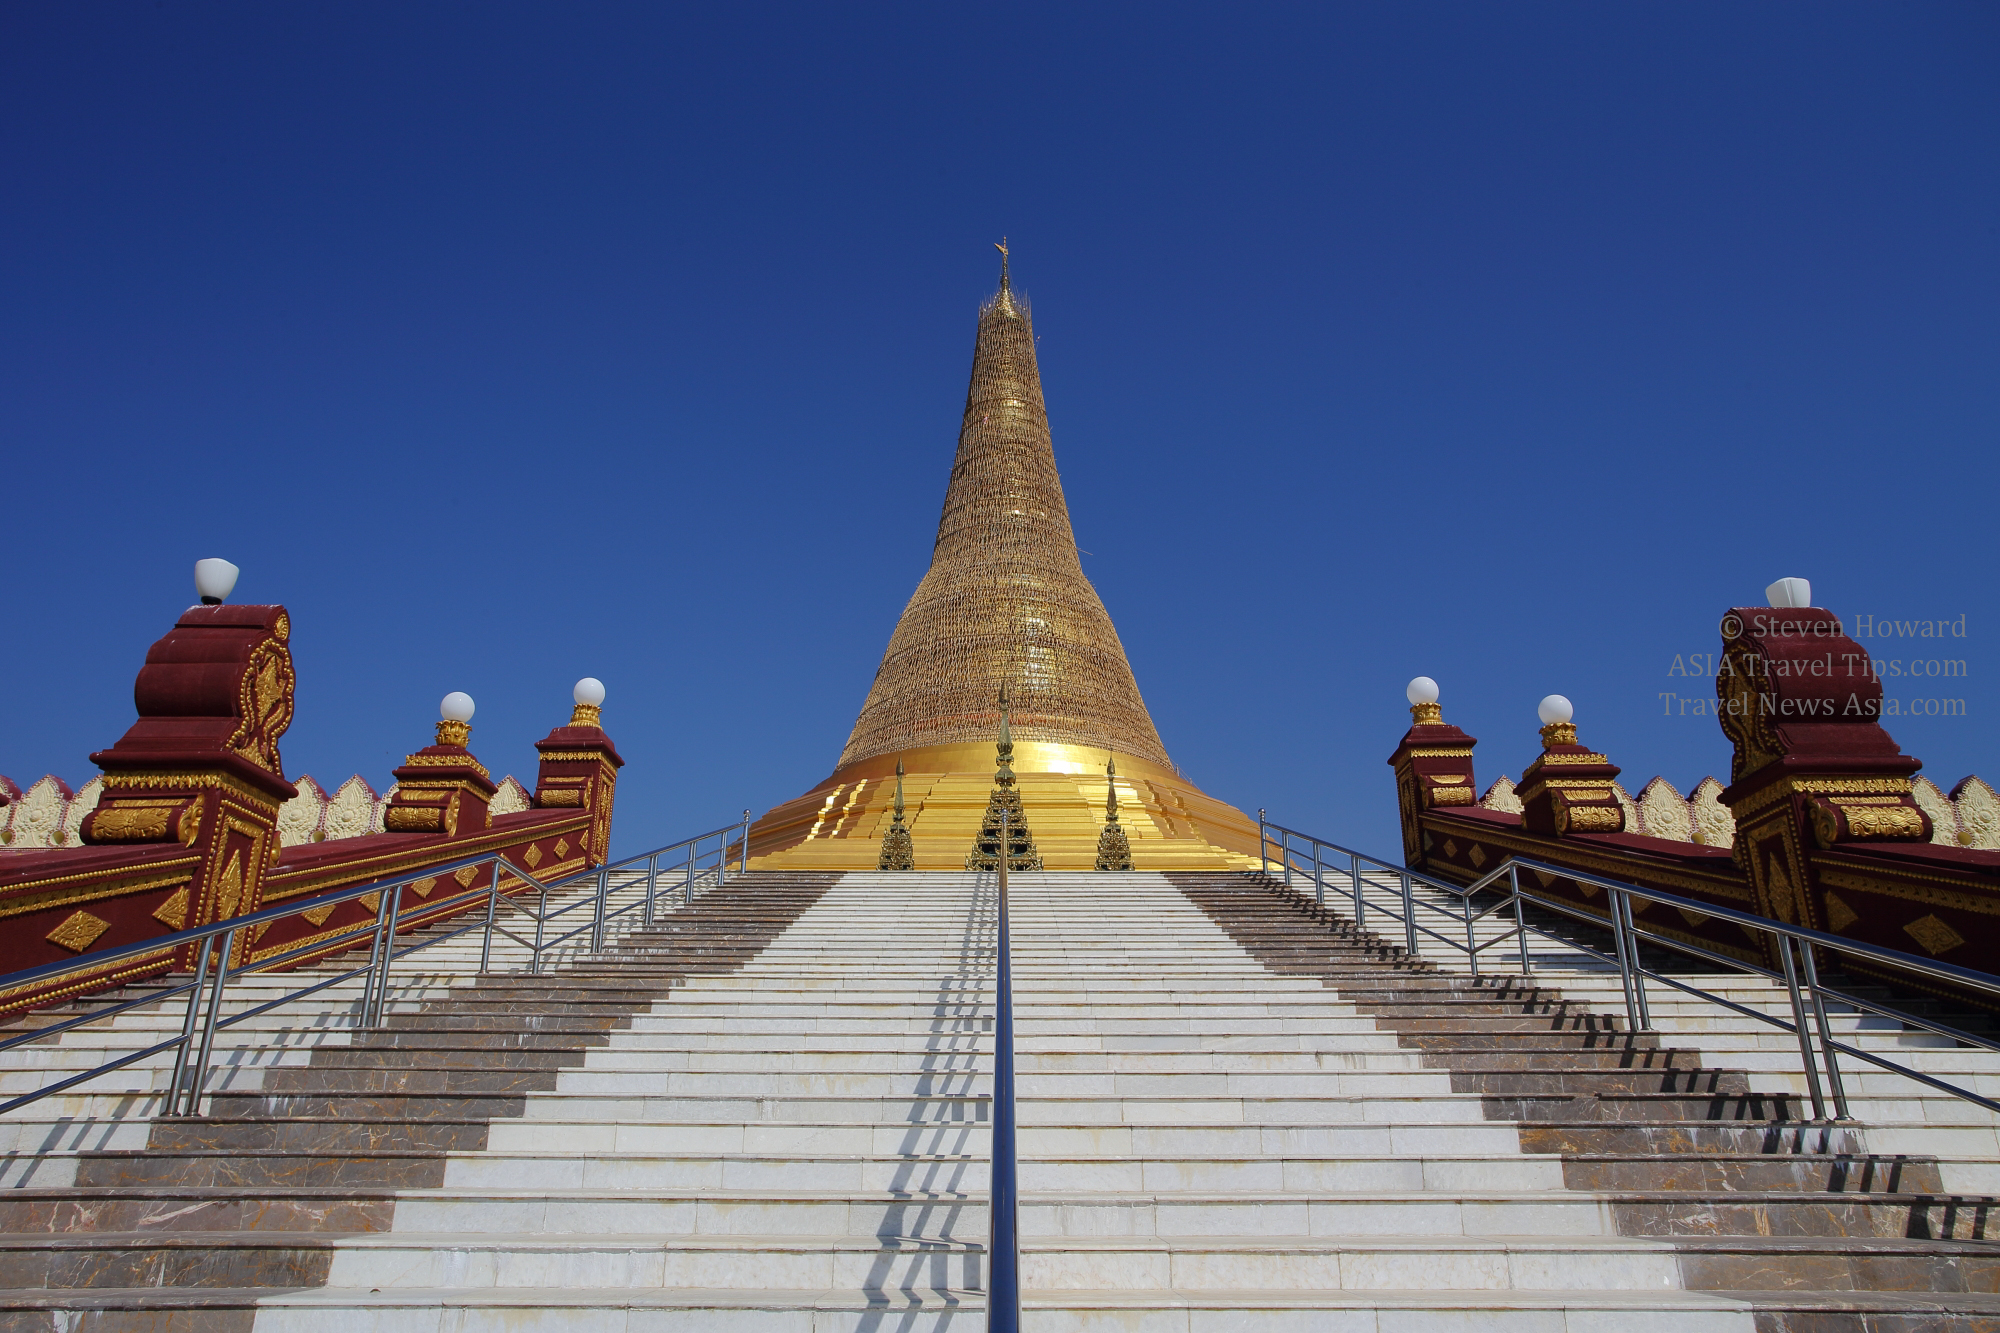 Steps leading up to Uppātasanti Pagoda in Nay Pyi Taw, Myanmar. Picture by Steven Howard of TravelNewsAsia.com Click to enlarge.